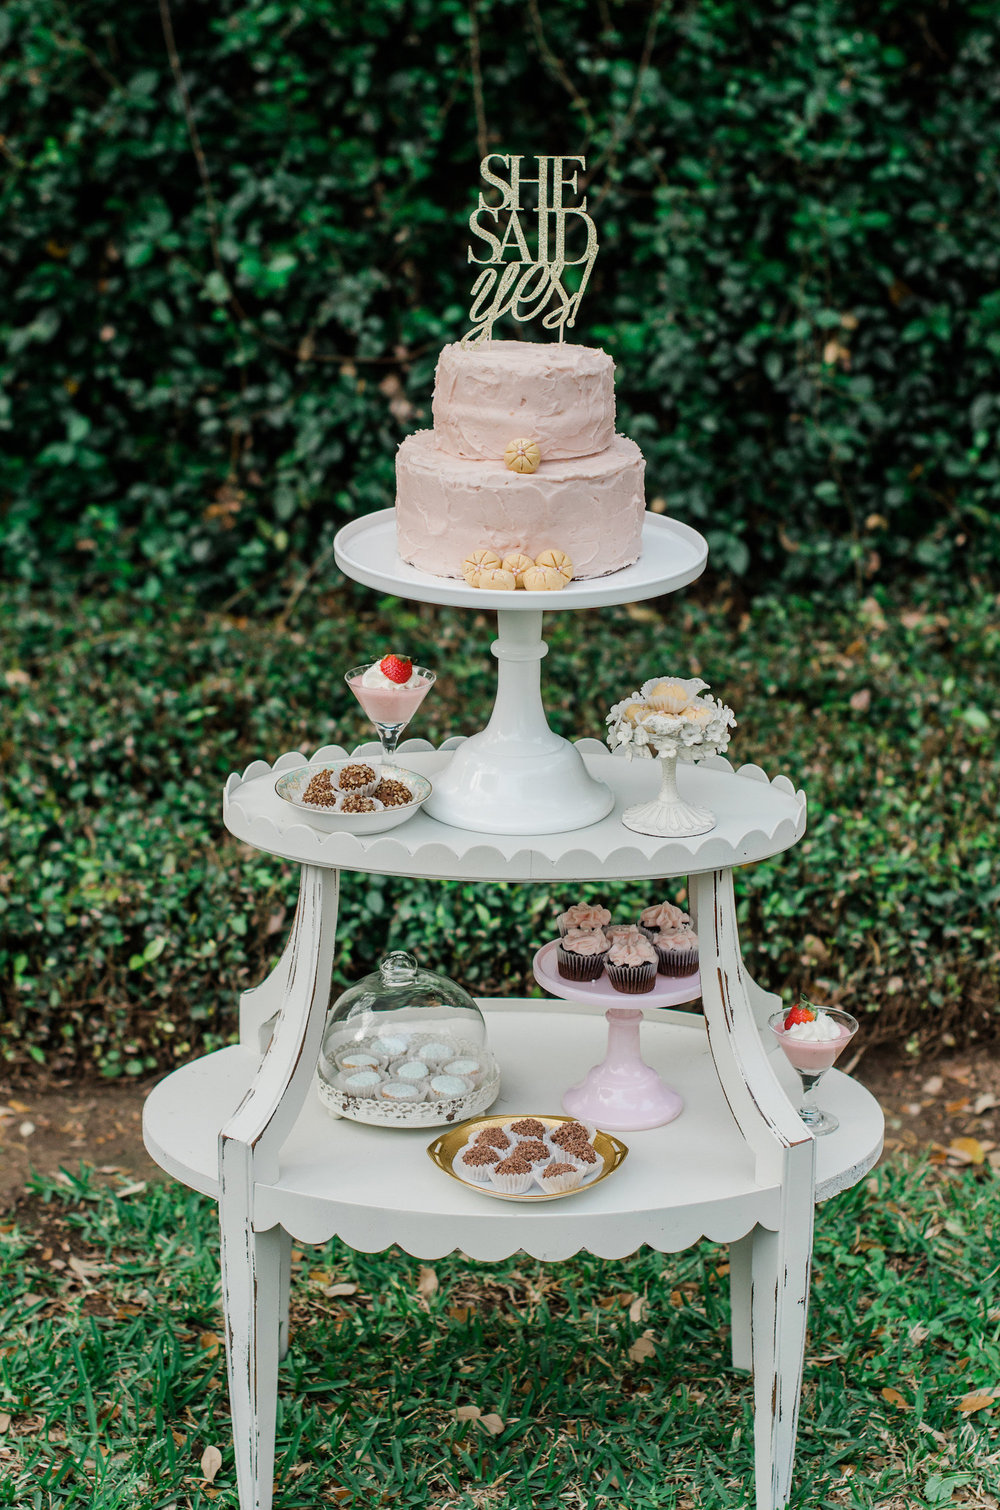  Super sweet dessert station with tiers and a cake with a She Said Yes Gold Lettered Cake Topper — Click to see 8 DIY Wedding Ideas for a Springtime Bridal Shower Brunch — Part of the 37 Creative DIY Wedding Ideas for Spring as seen on www.BrendasWed